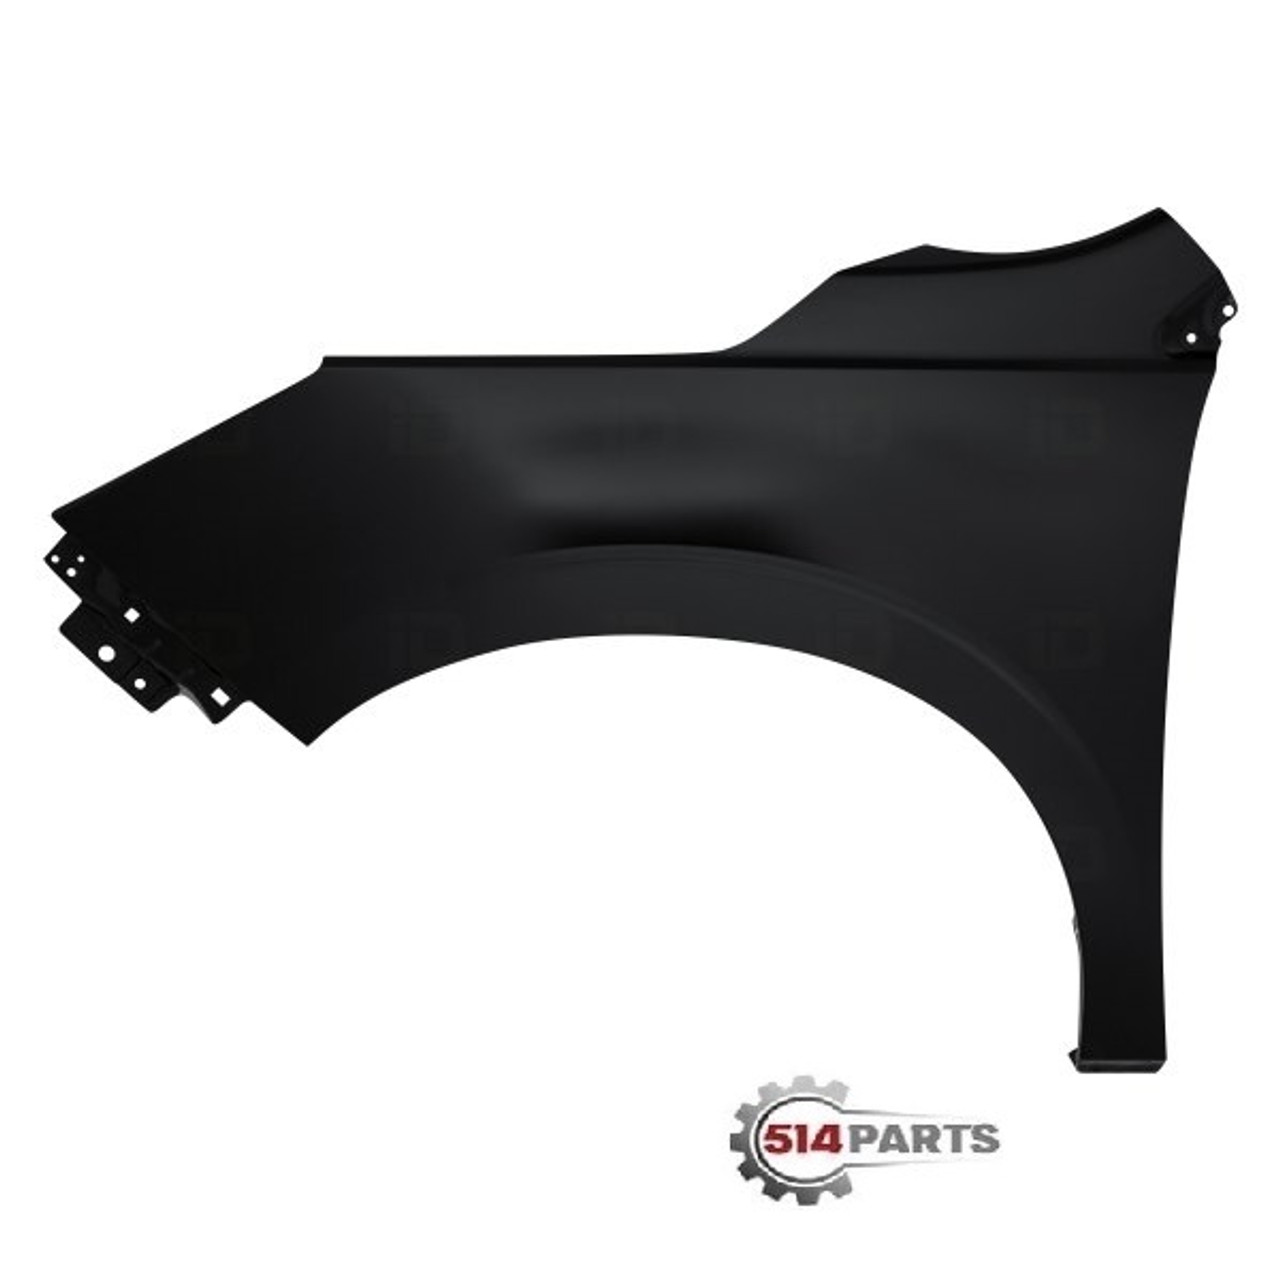 2014 - 2018 SUBARU FORESTER FRONT FENDERS - AILES AVANT